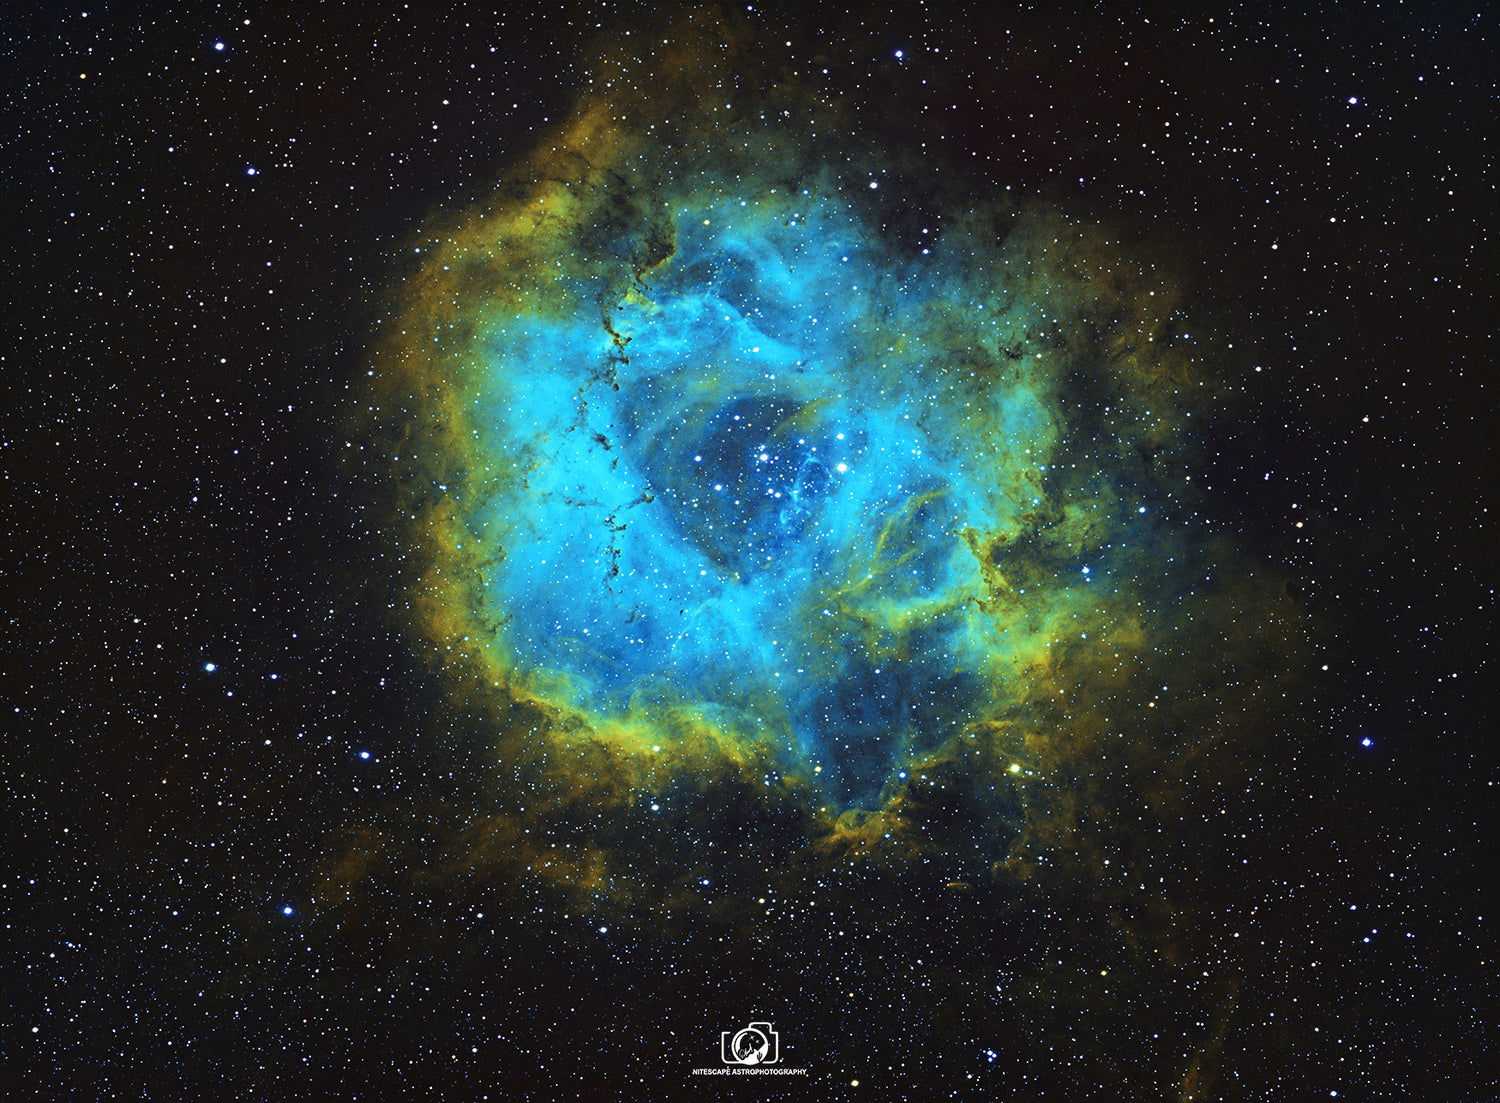 Narrowband Astrophotography: Capturing the Beauty of the Universe in a New Light